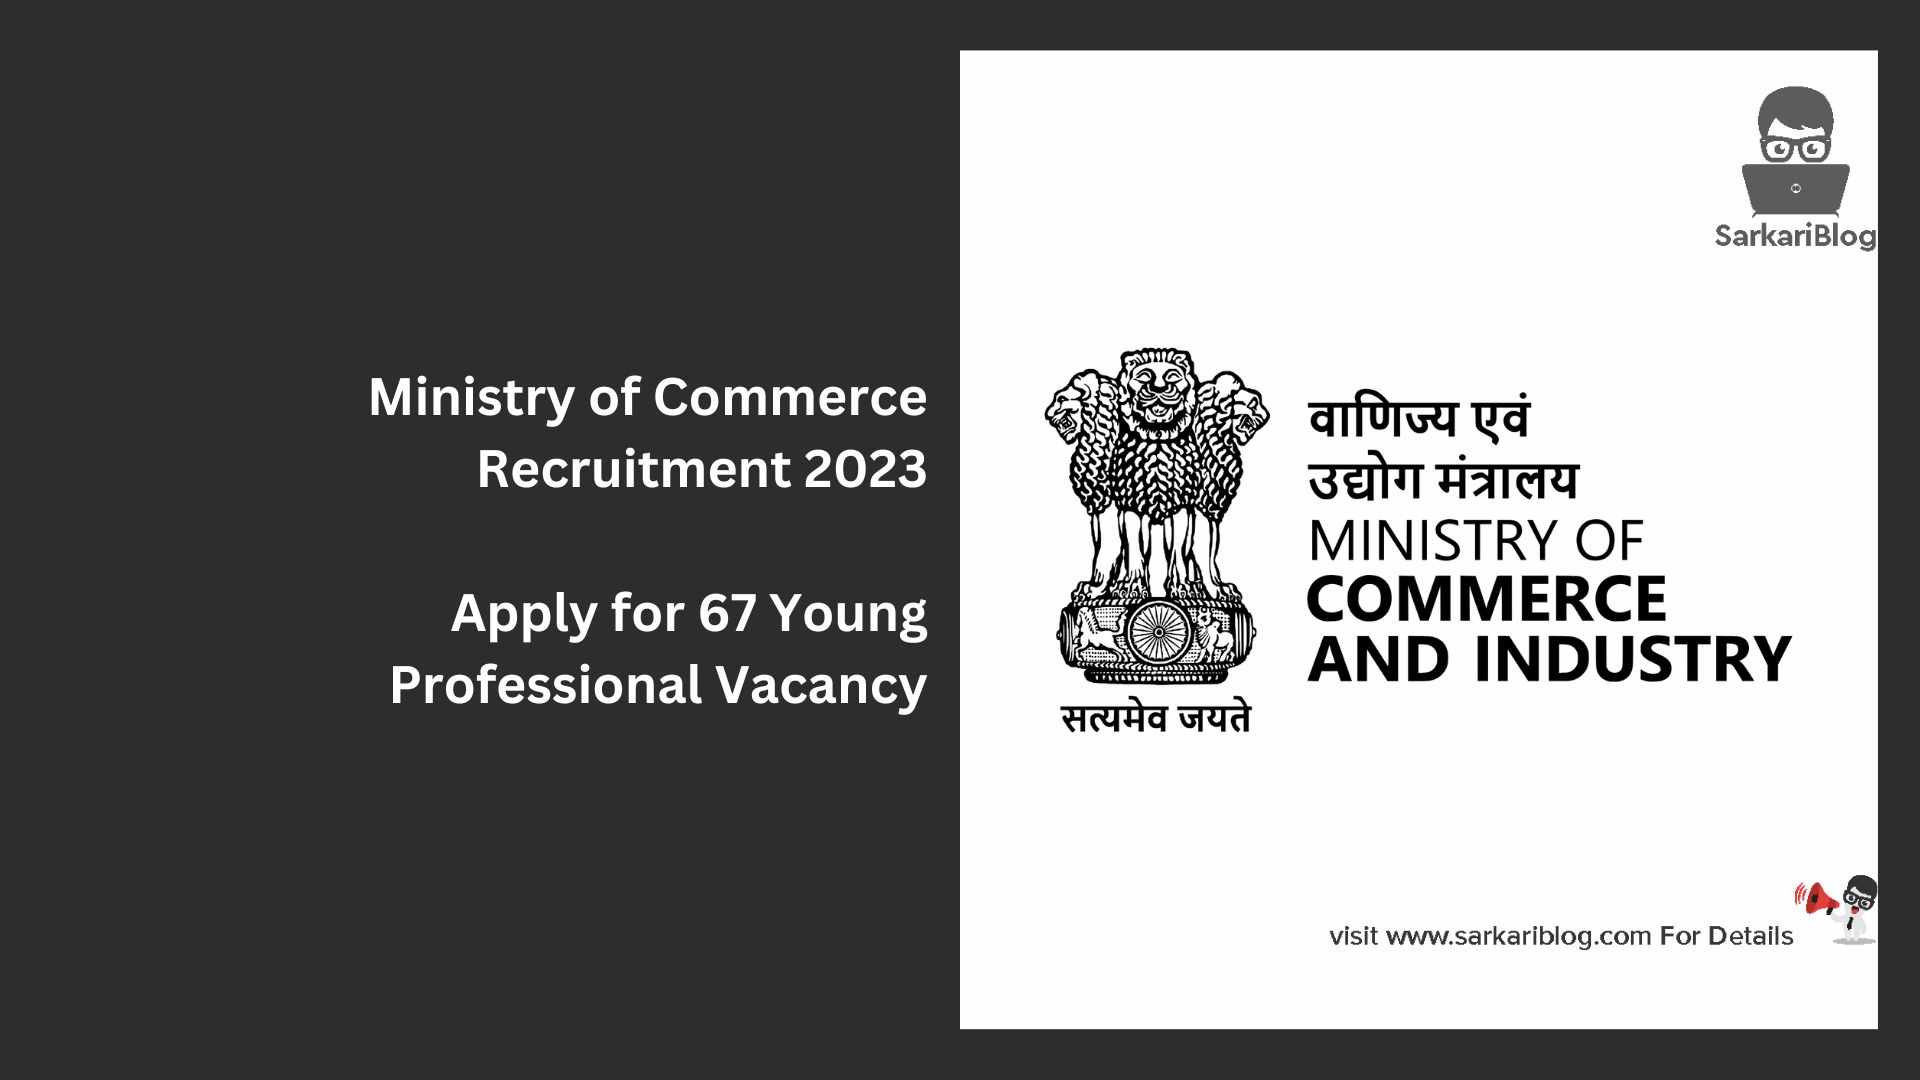 Ministry of Commerce Recruitment 2023